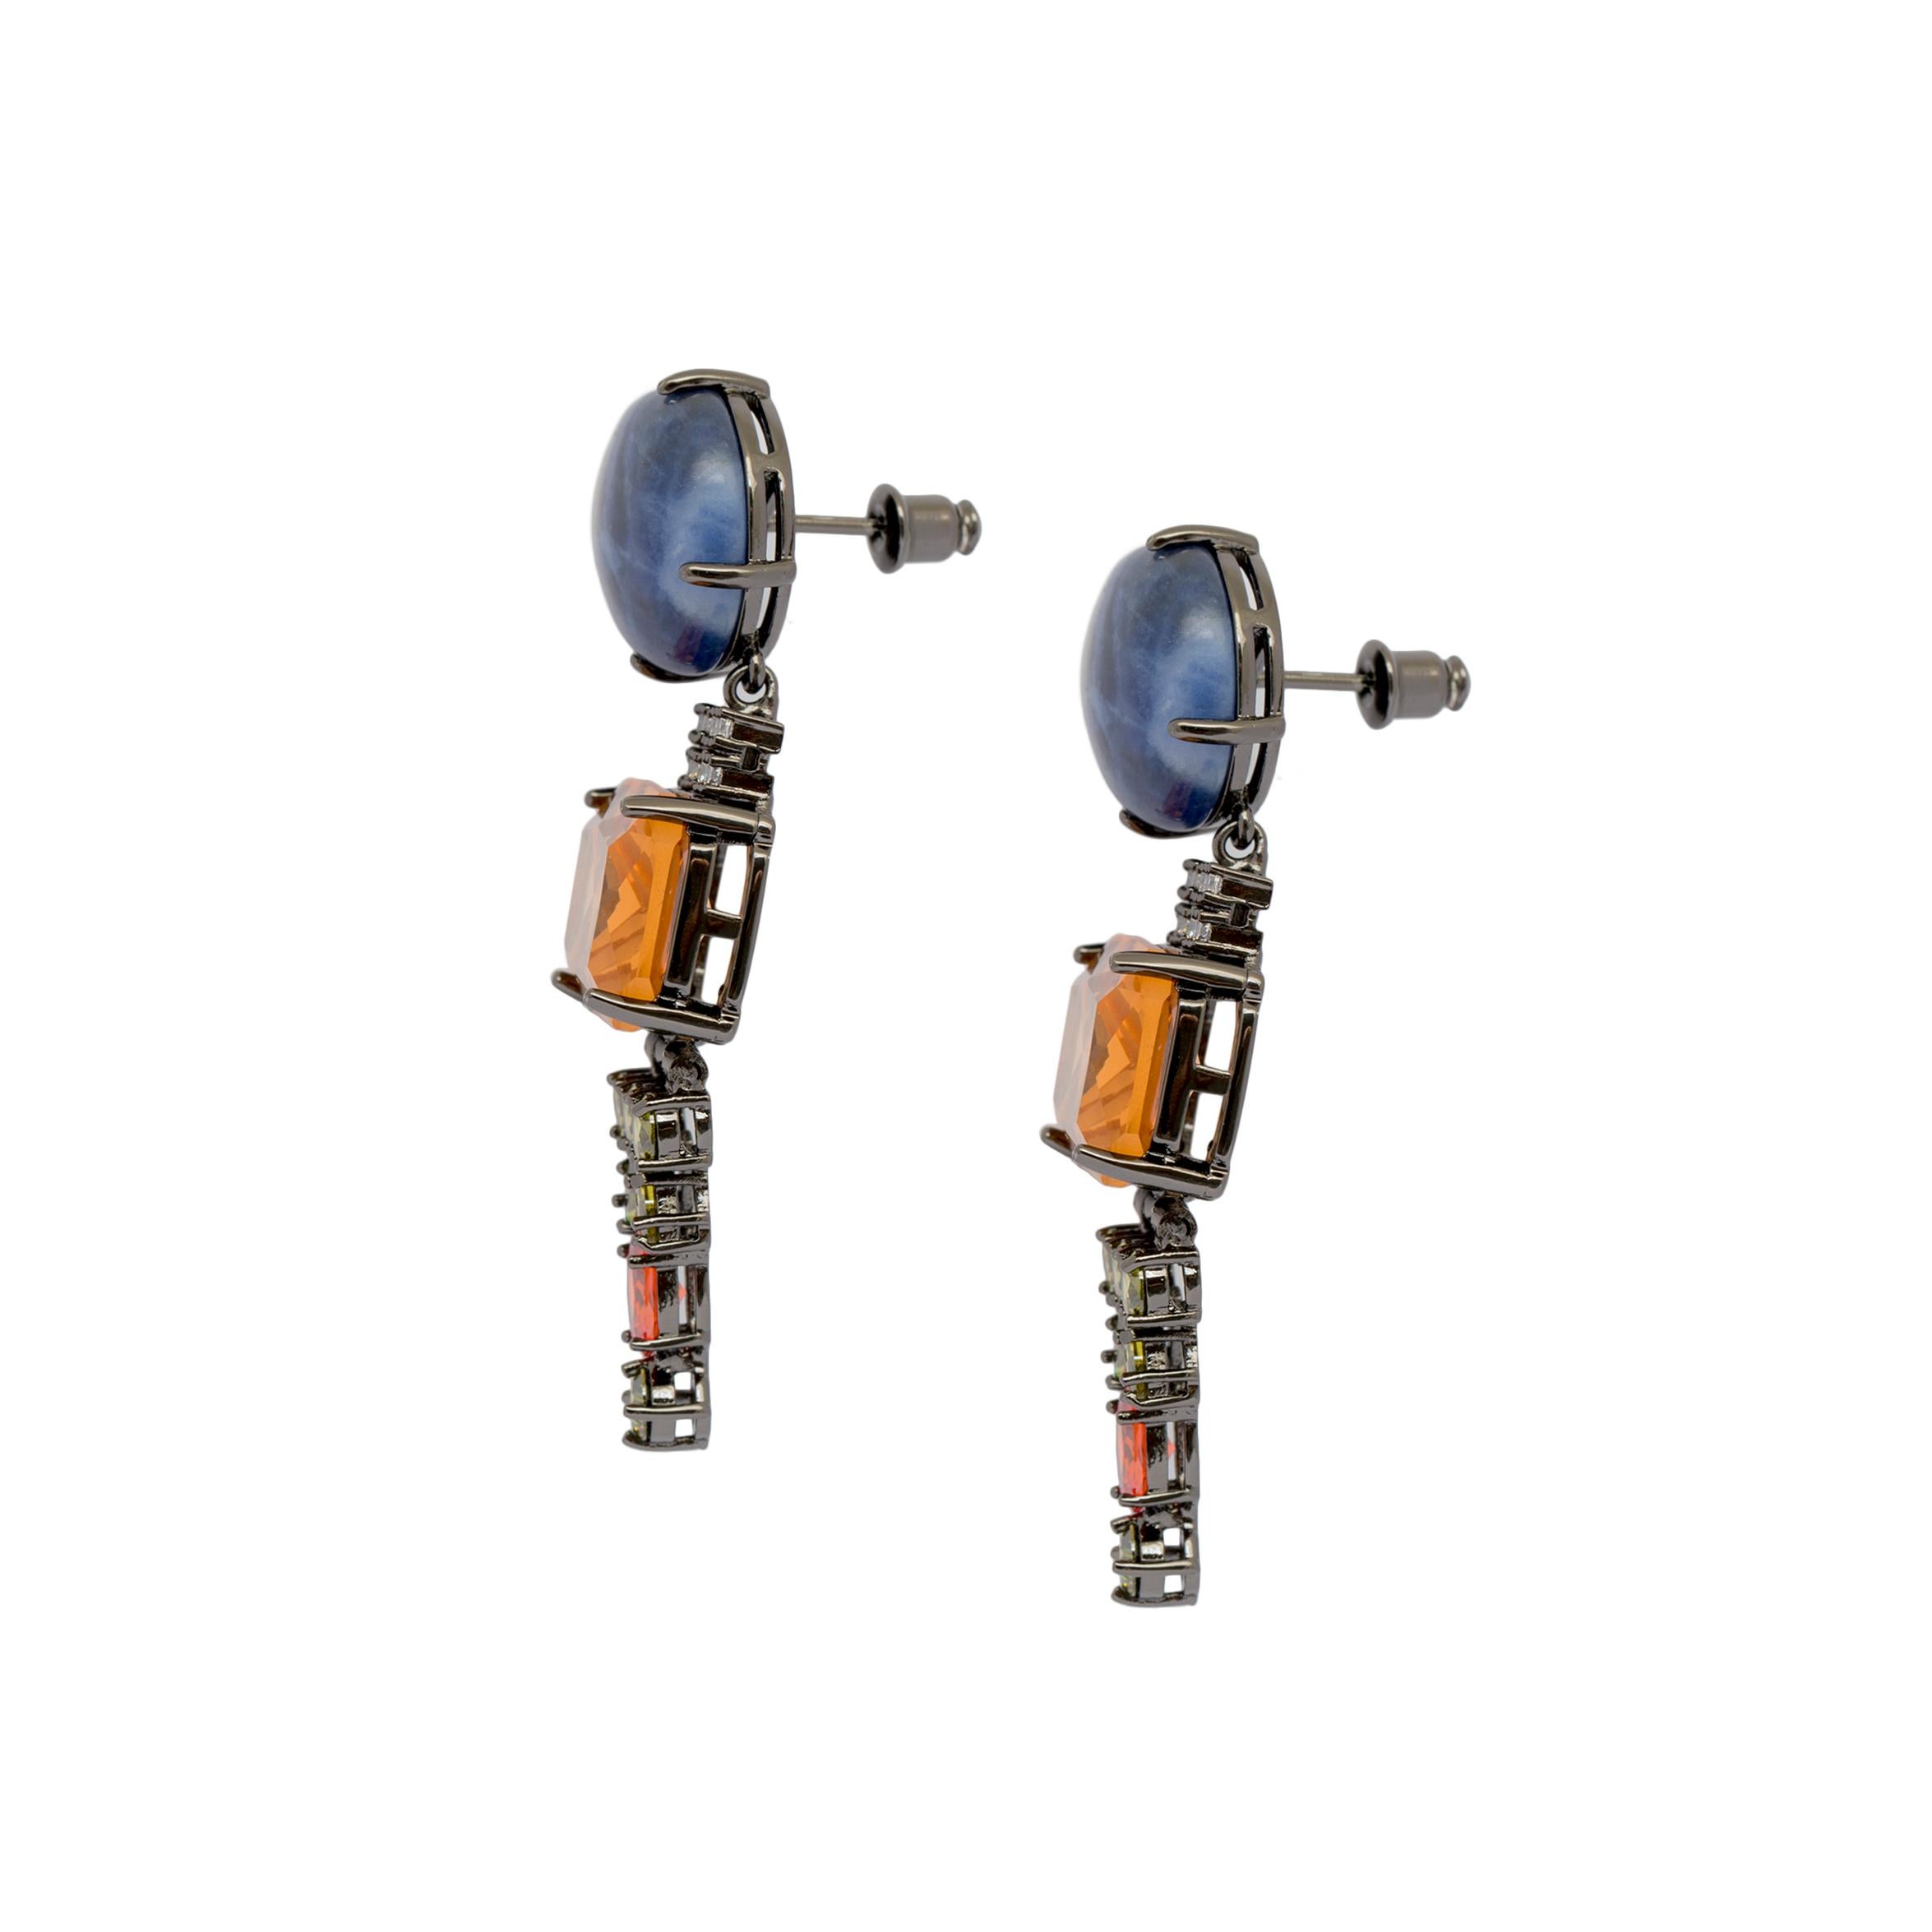 Contemporary Dangling Earrings with Sodalite and colorful flur zircons from IOSSELLIANI For Sale